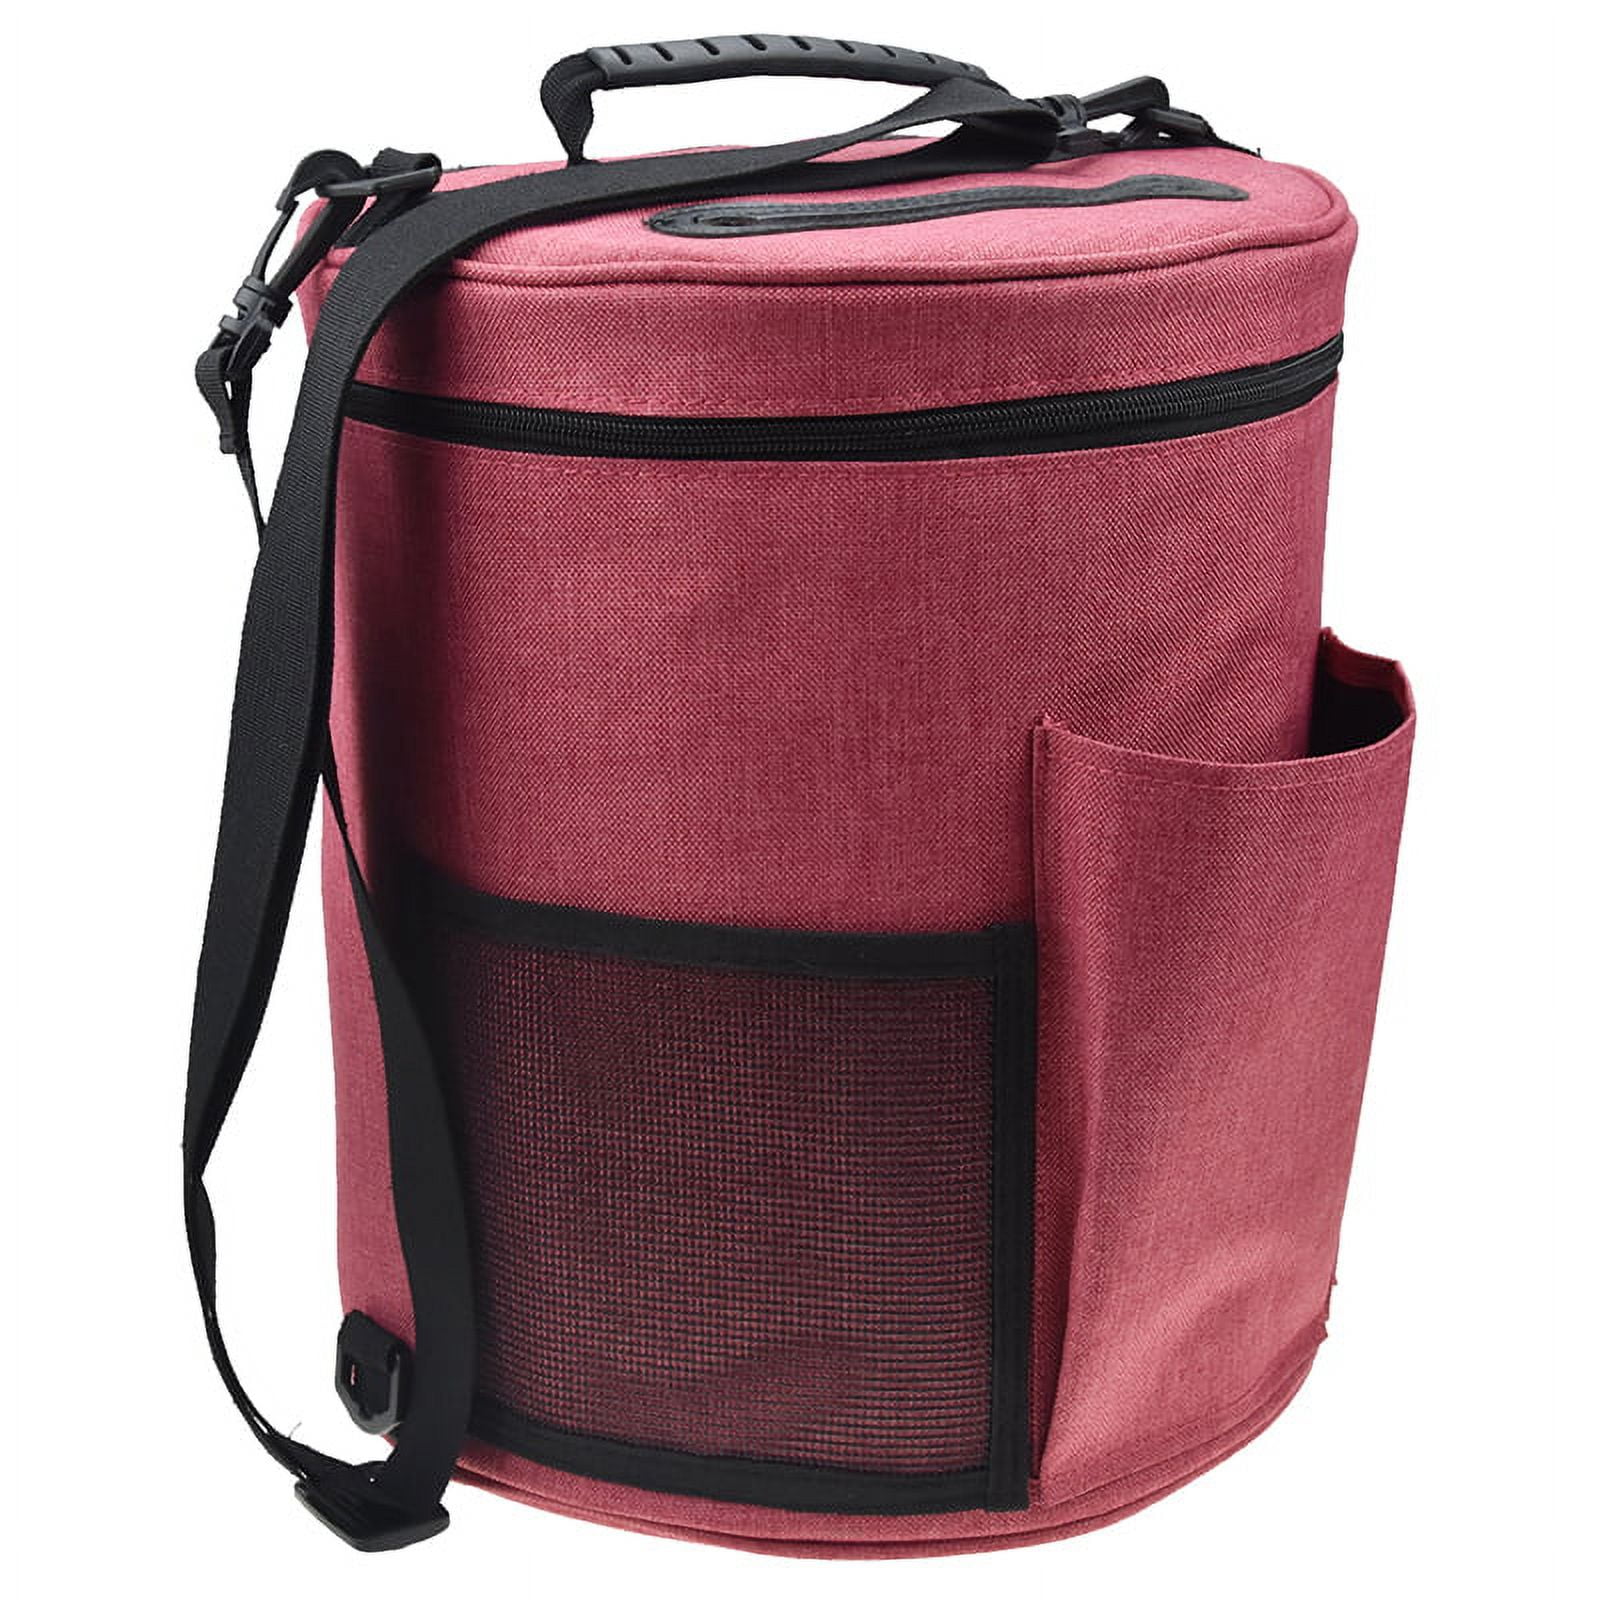 Best Yarn Bag/Knitting Bag. Portable, Light and Easy to Carry. Yarn Storage Bags Have Pockets for Crochet Hooks & Knitting Needles. Slits on Top to